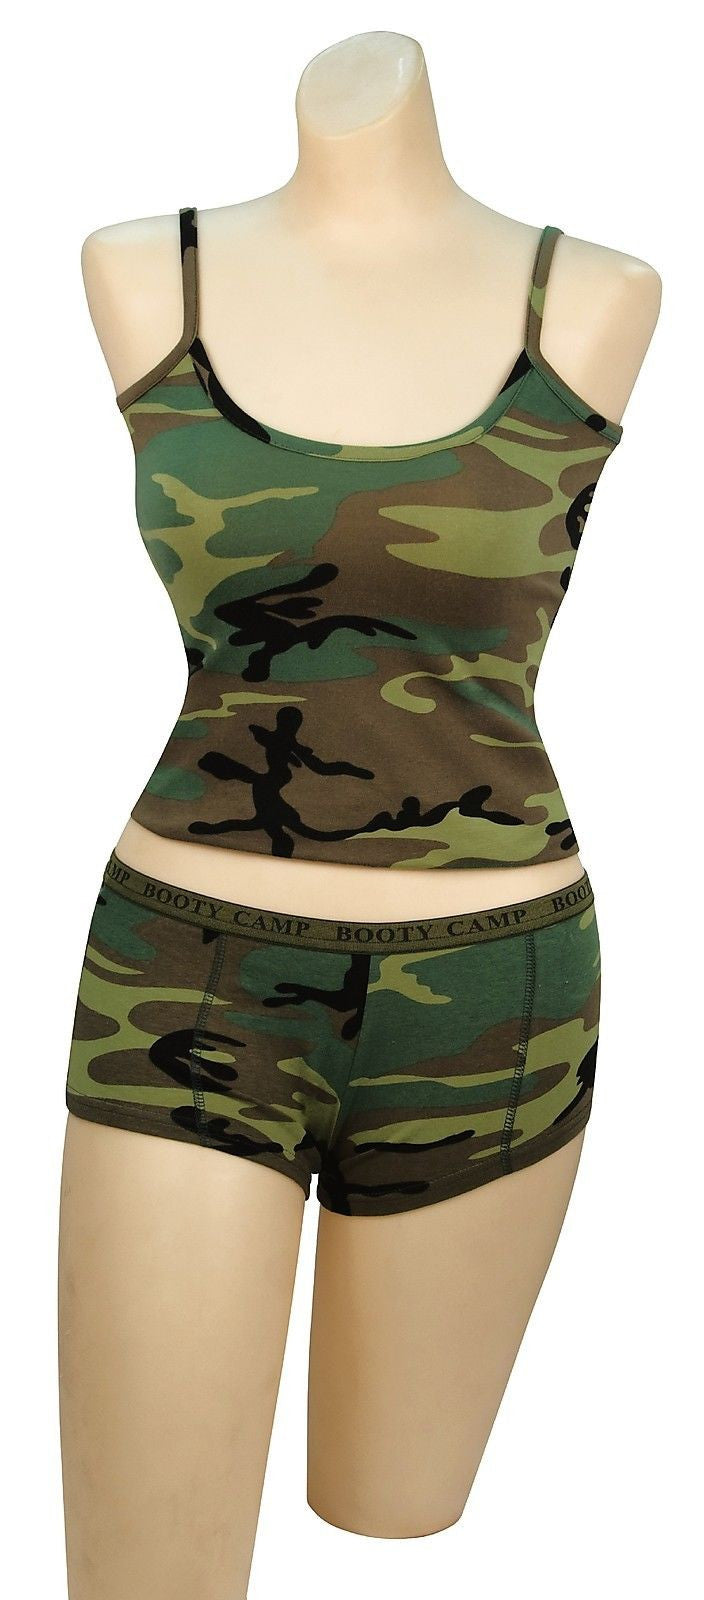 Womens Camouflage Booty Camp Shorts Cute Underwear Panties & Soft Tanktop